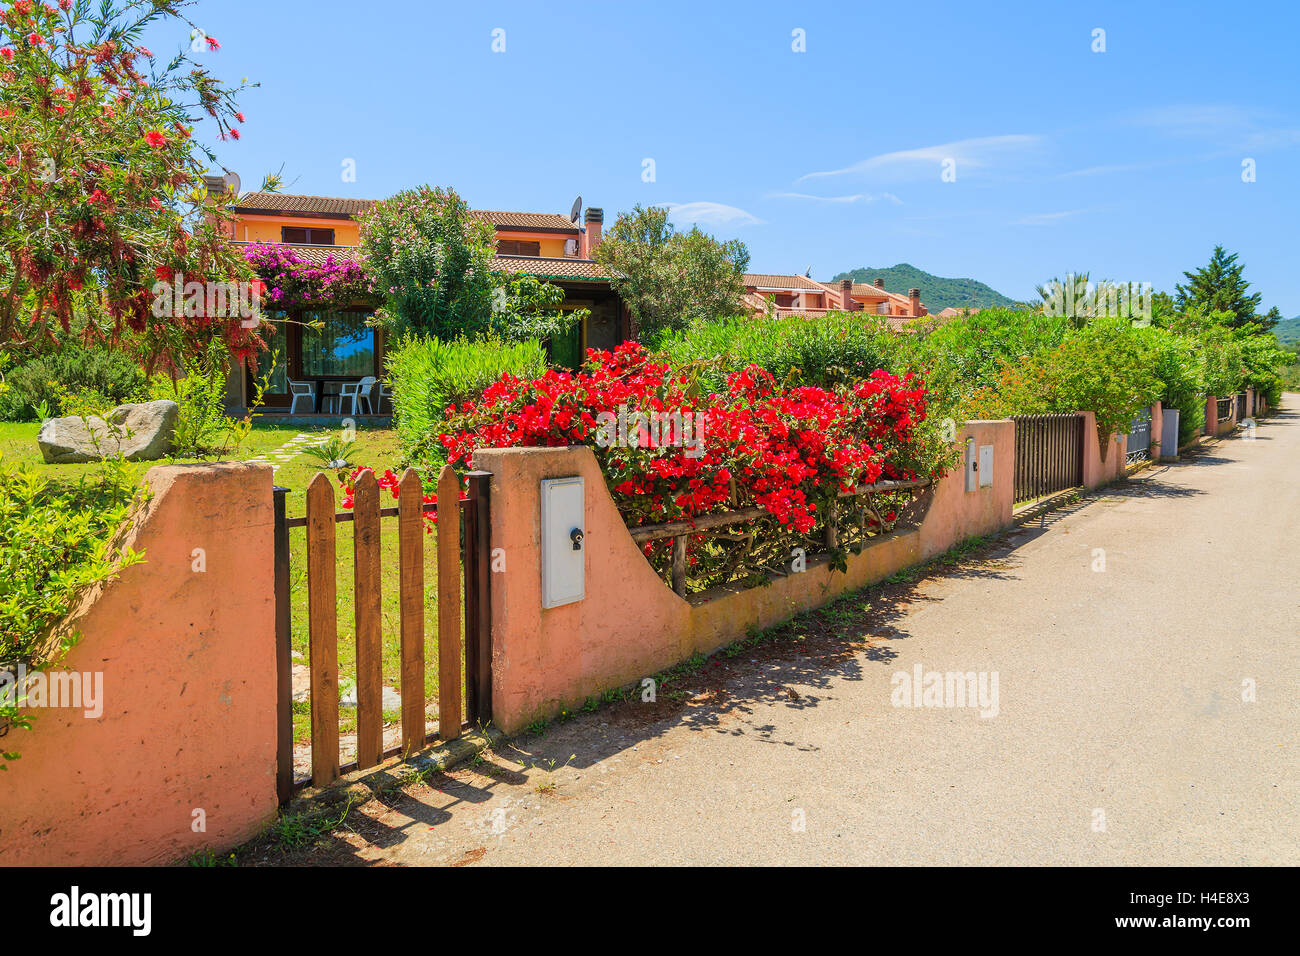 Flowers in garden of holiday villa houses on a street in Costa Rei town, Sardinia island, Italy Stock Photo